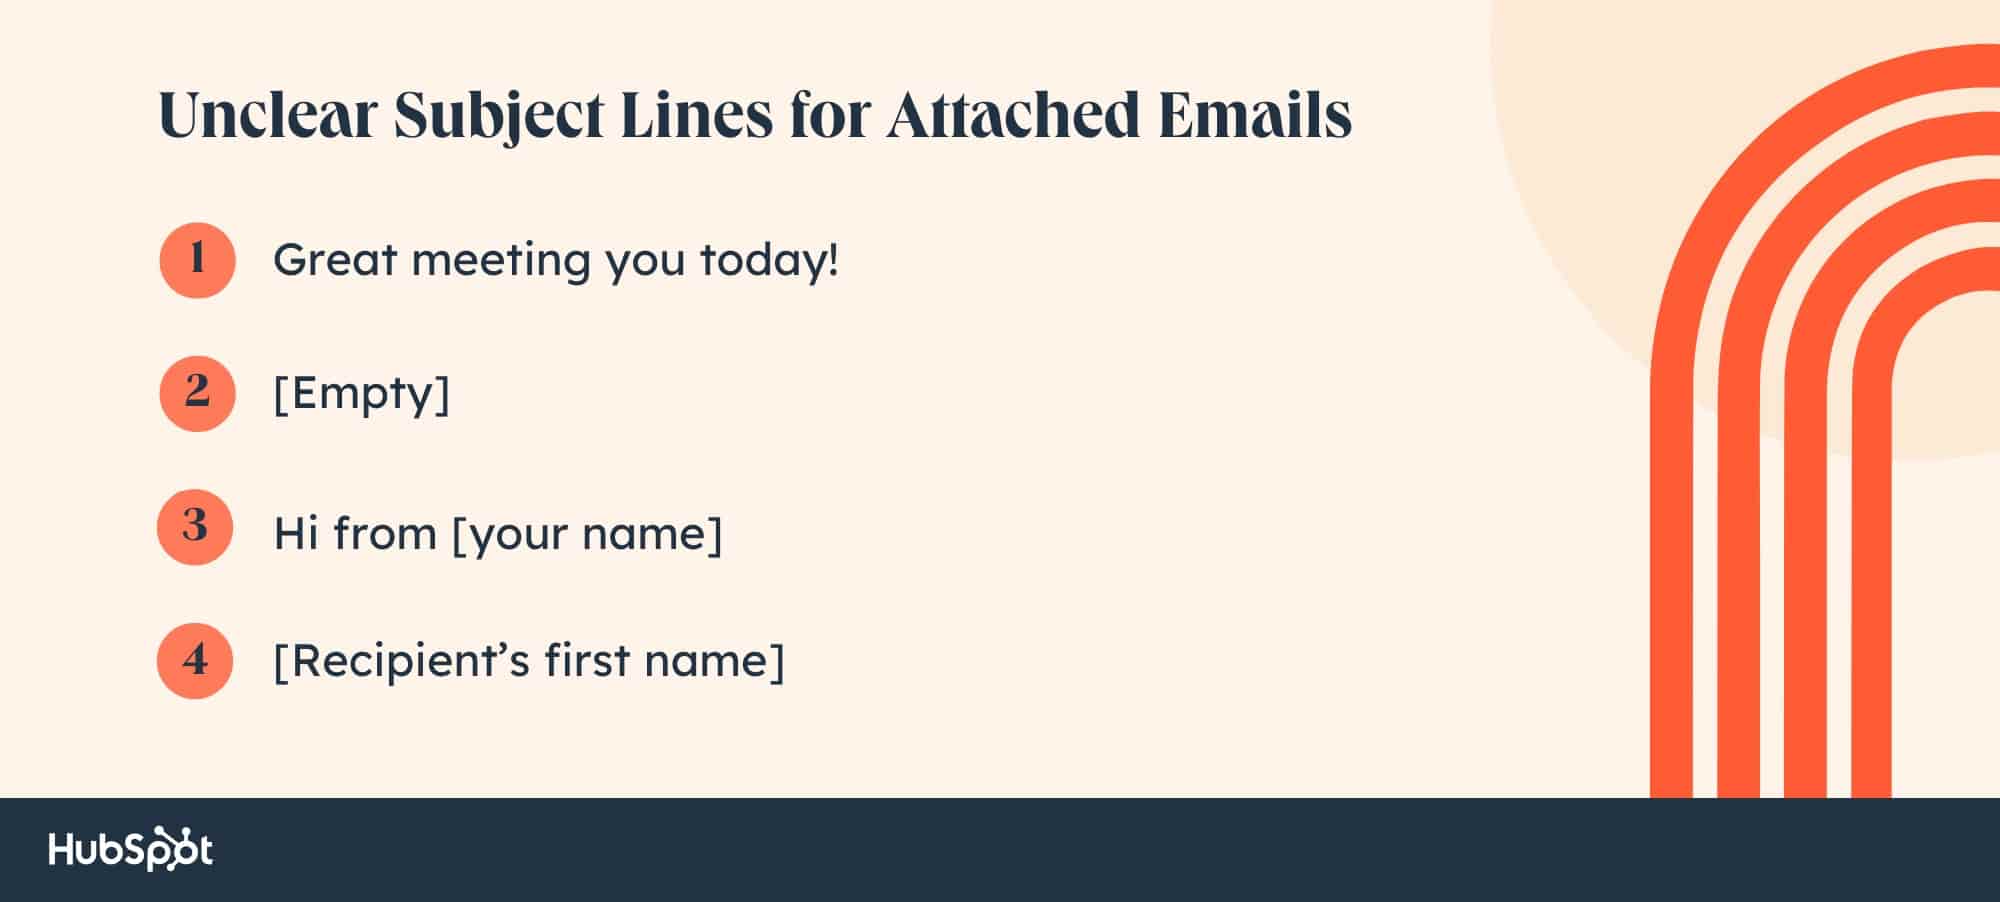 Unclear subject lines for attached emails. Great meeting you today. [Empty.] Hi from [Your name.] [Recipient’s first name.]